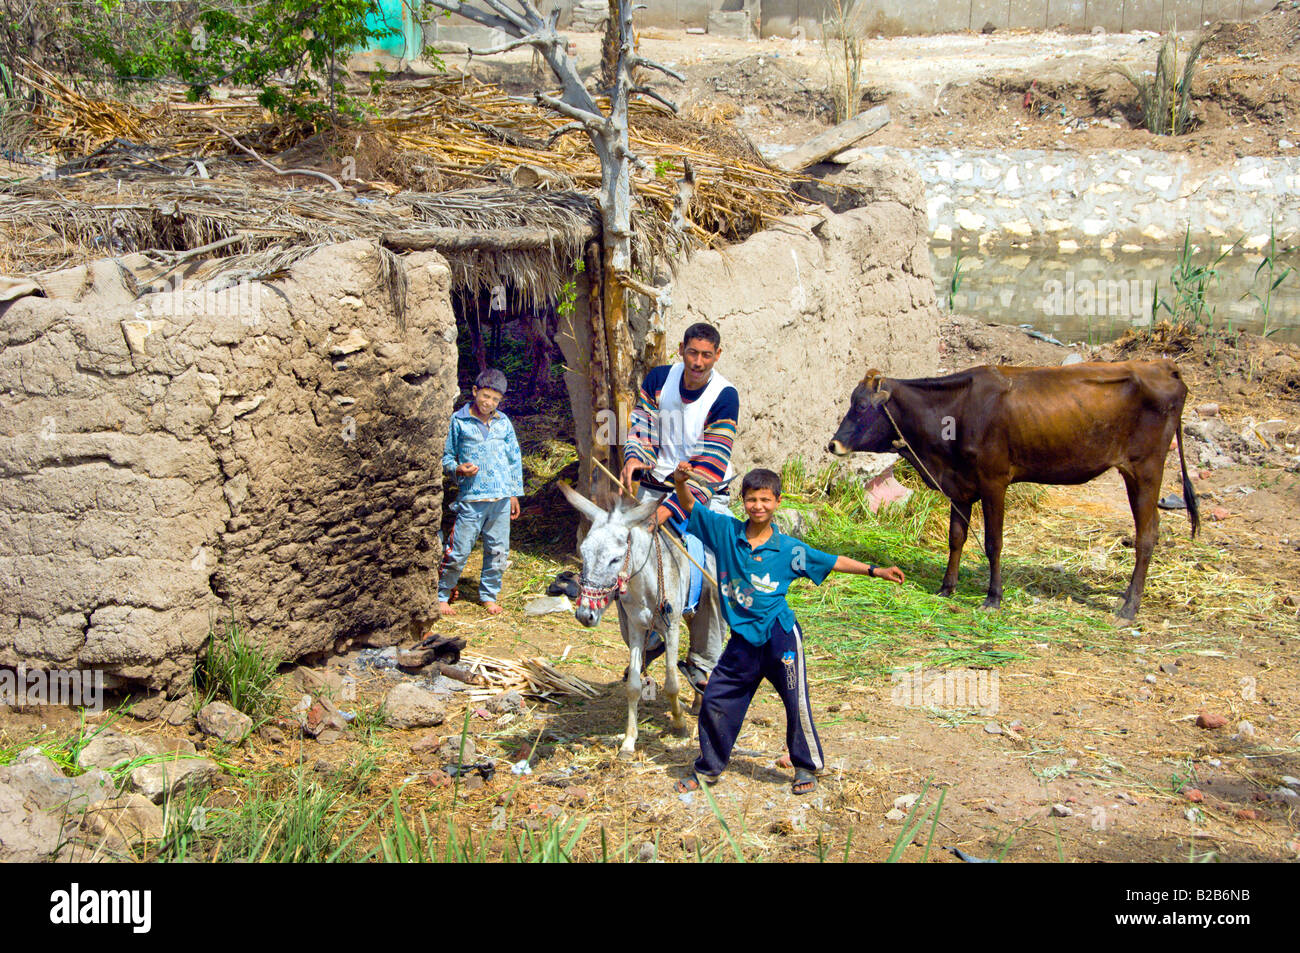 The El Fayoum countryside depicting rural life in Egypt Stock Photo